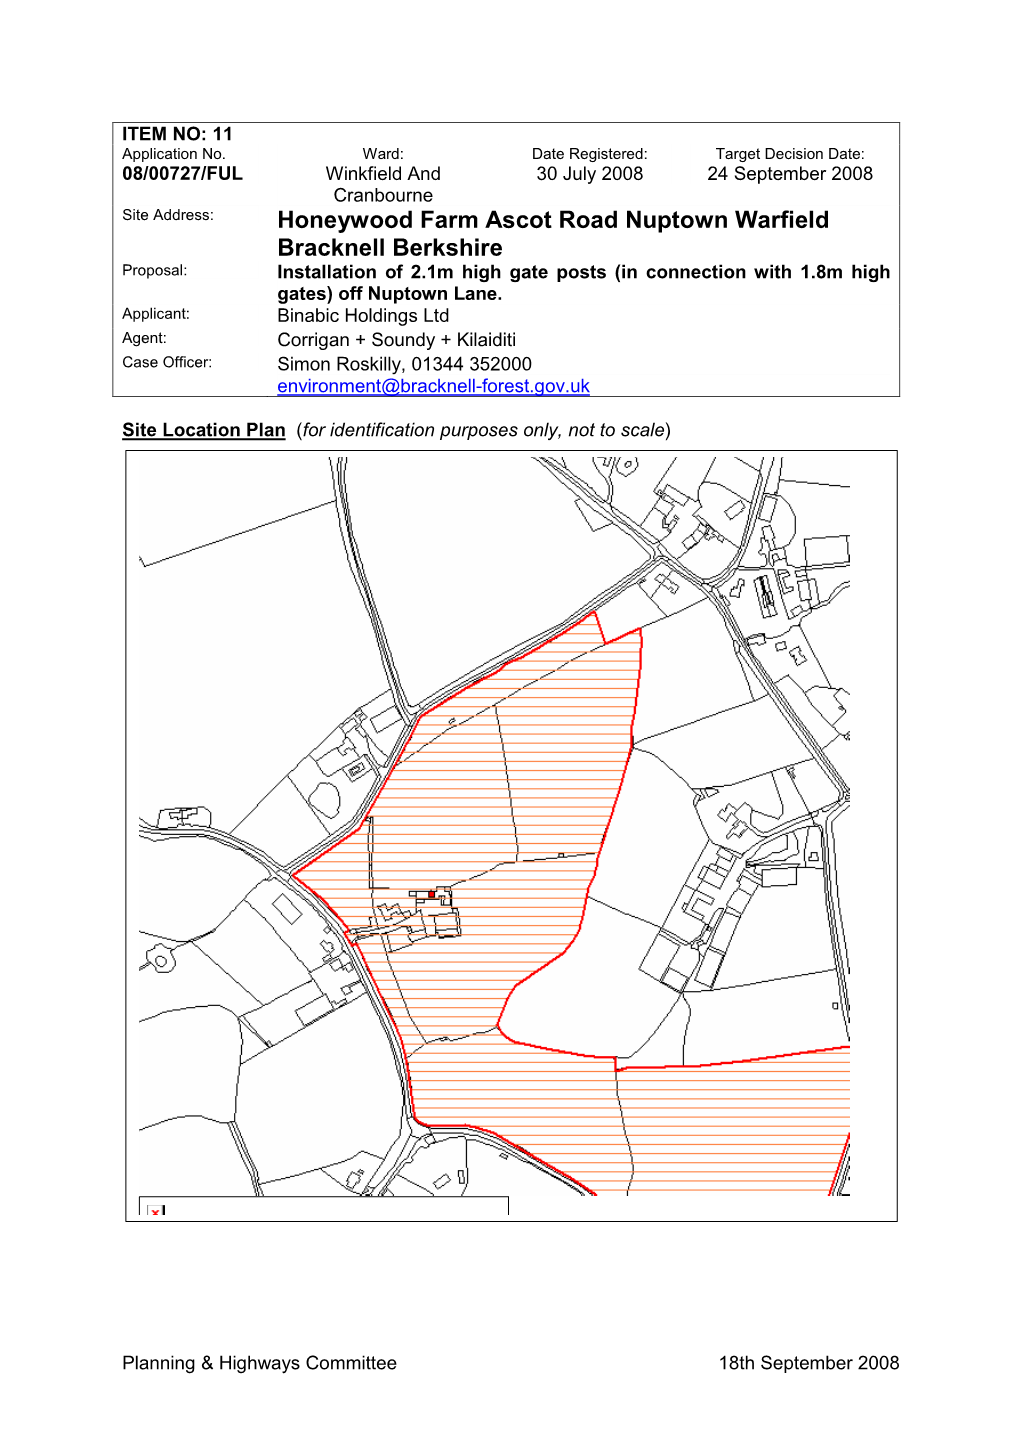 Honeywood Farm Ascot Road Nuptown Warfield Bracknell Berkshire Proposal: Installation of 2.1M High Gate Posts (In Connection with 1.8M High Gates) Off Nuptown Lane